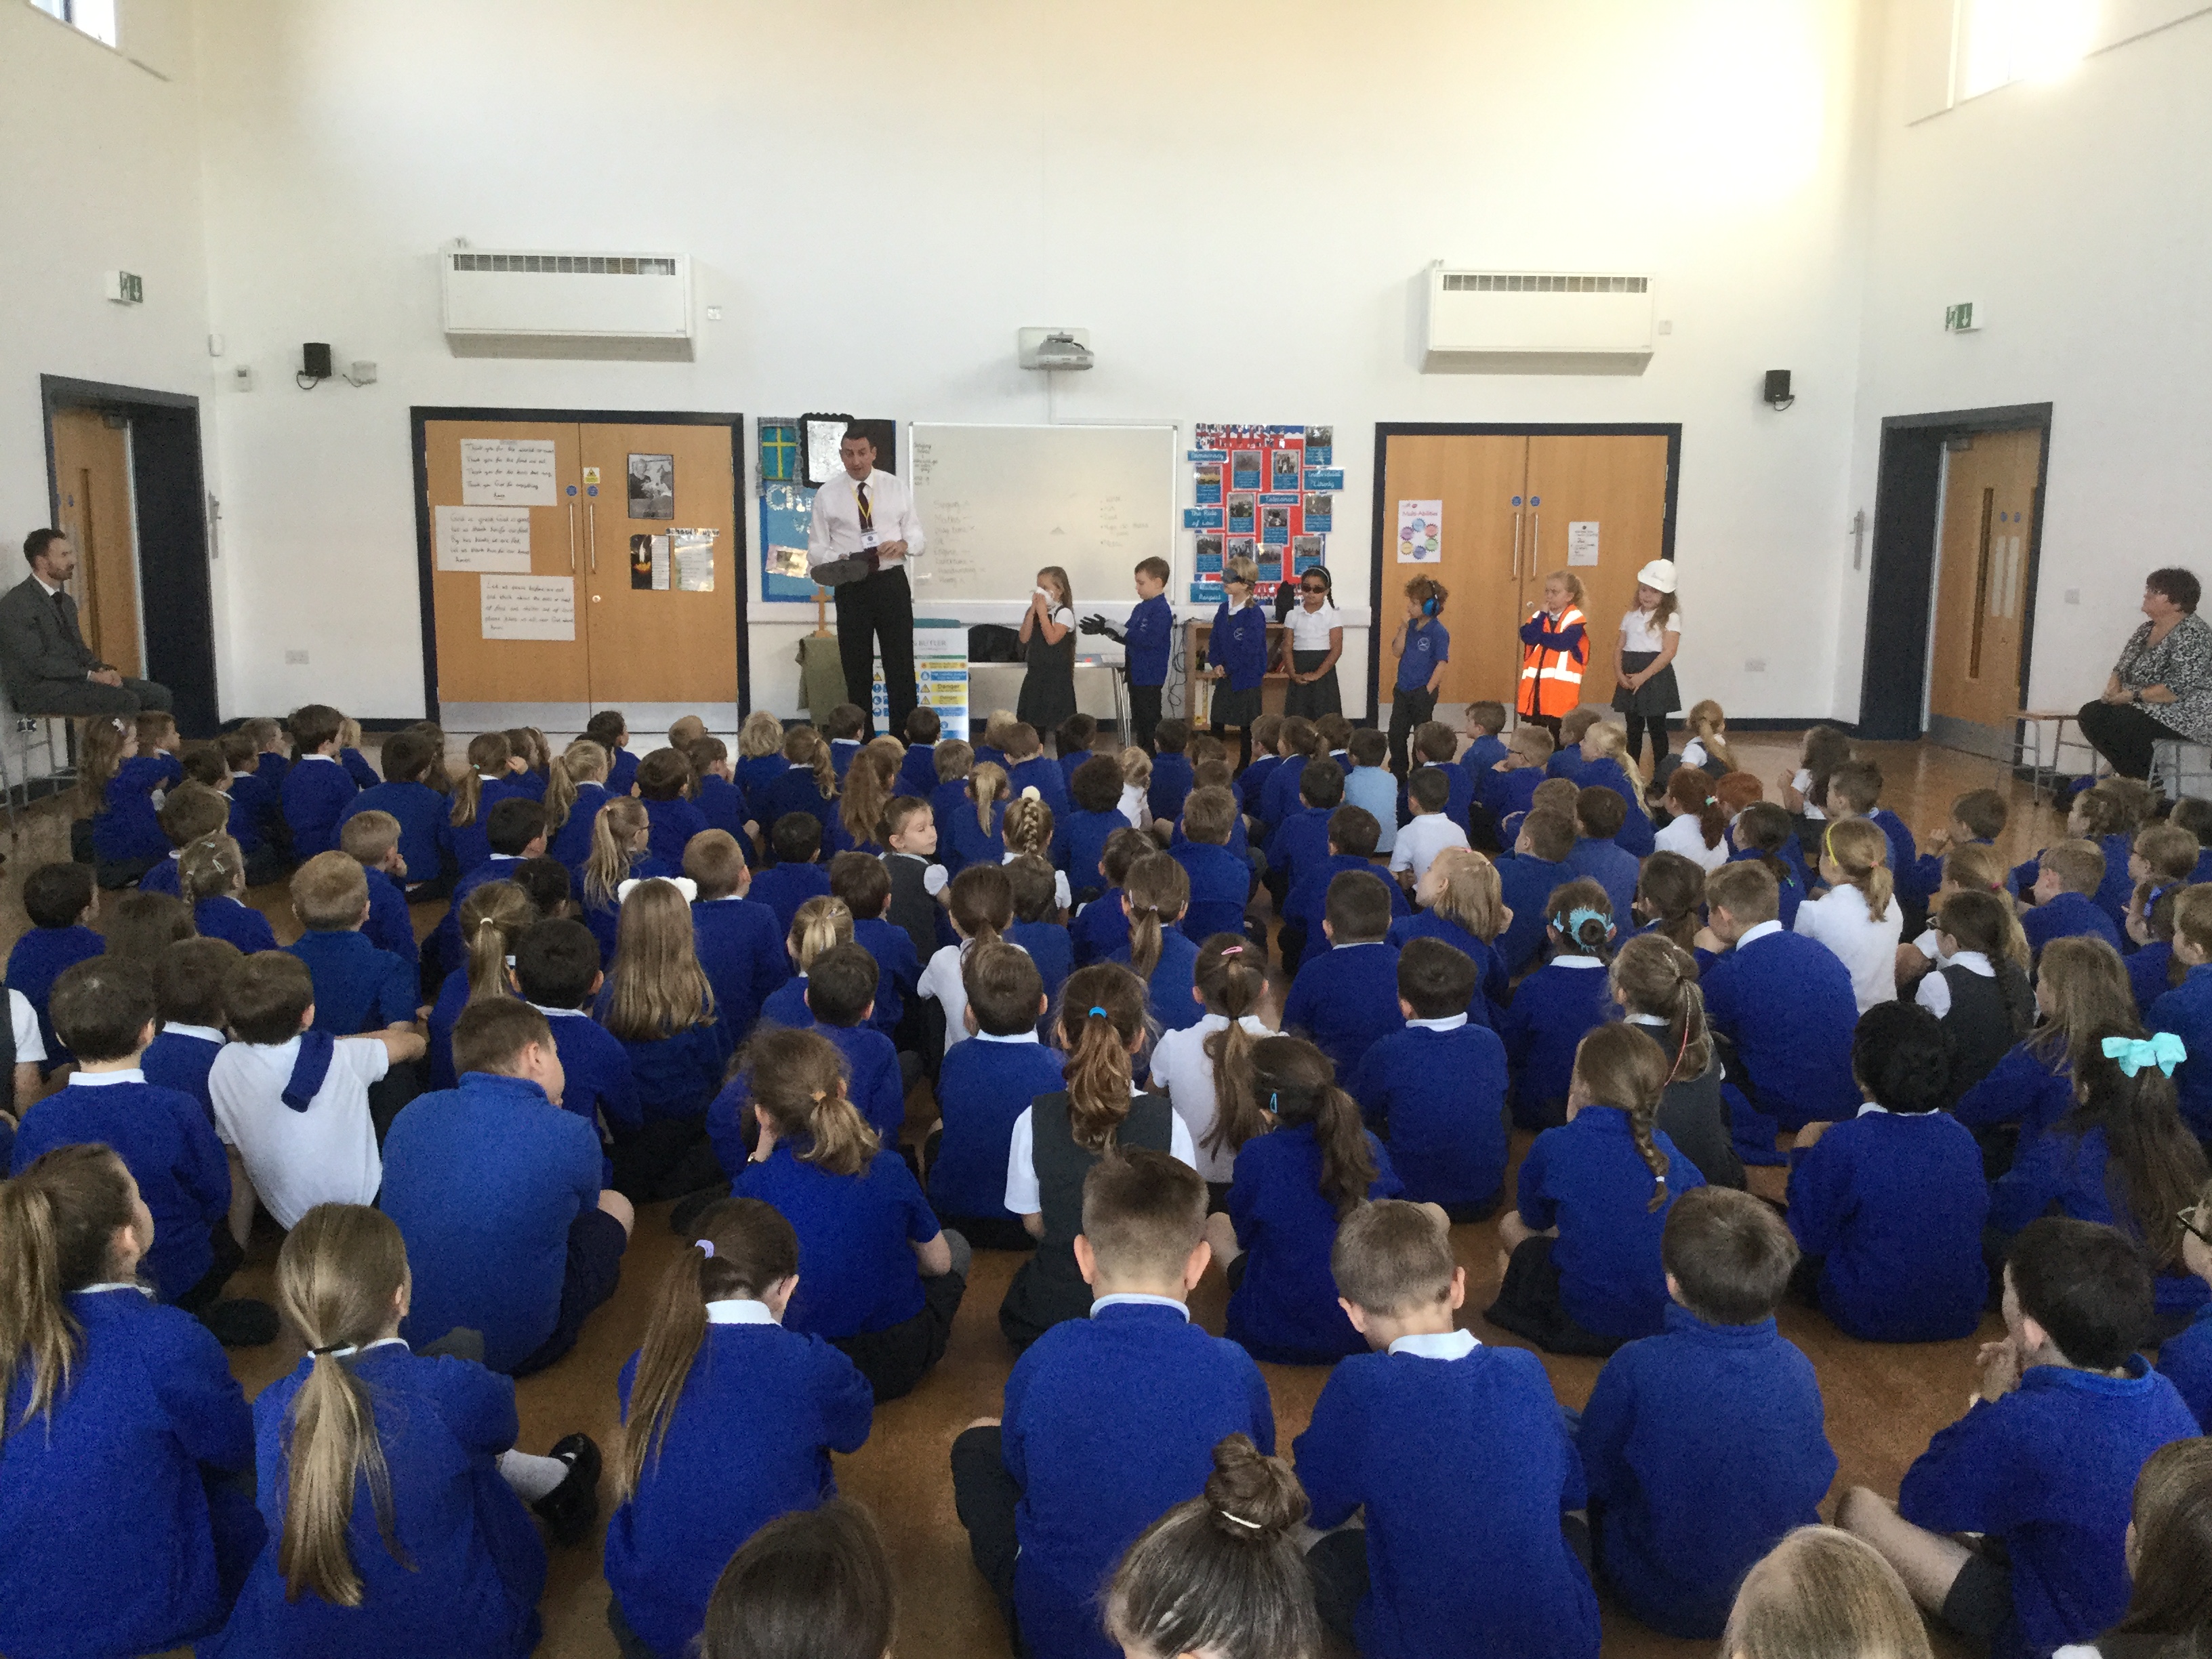 DYER & BUTLER ENGAGES WITH LOCAL SCHOOLS TO PROMOTE HEALTH AND SAFETY